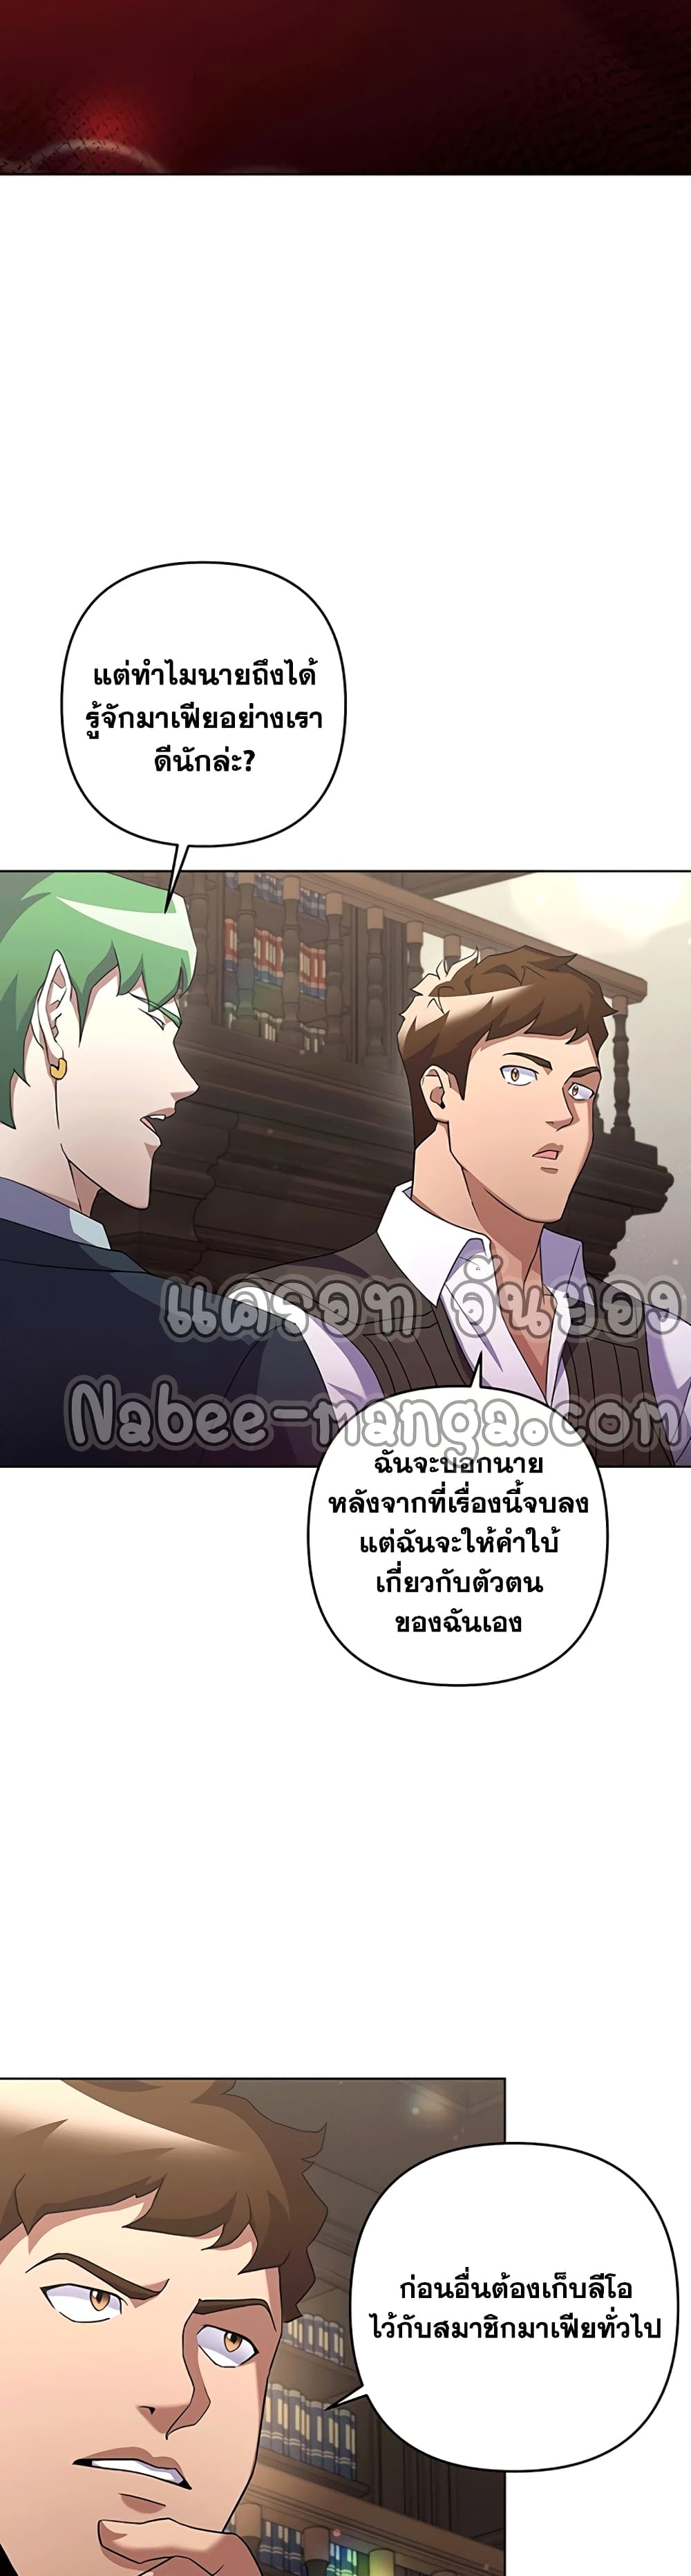 Surviving in an Action Manhwa21 (15)